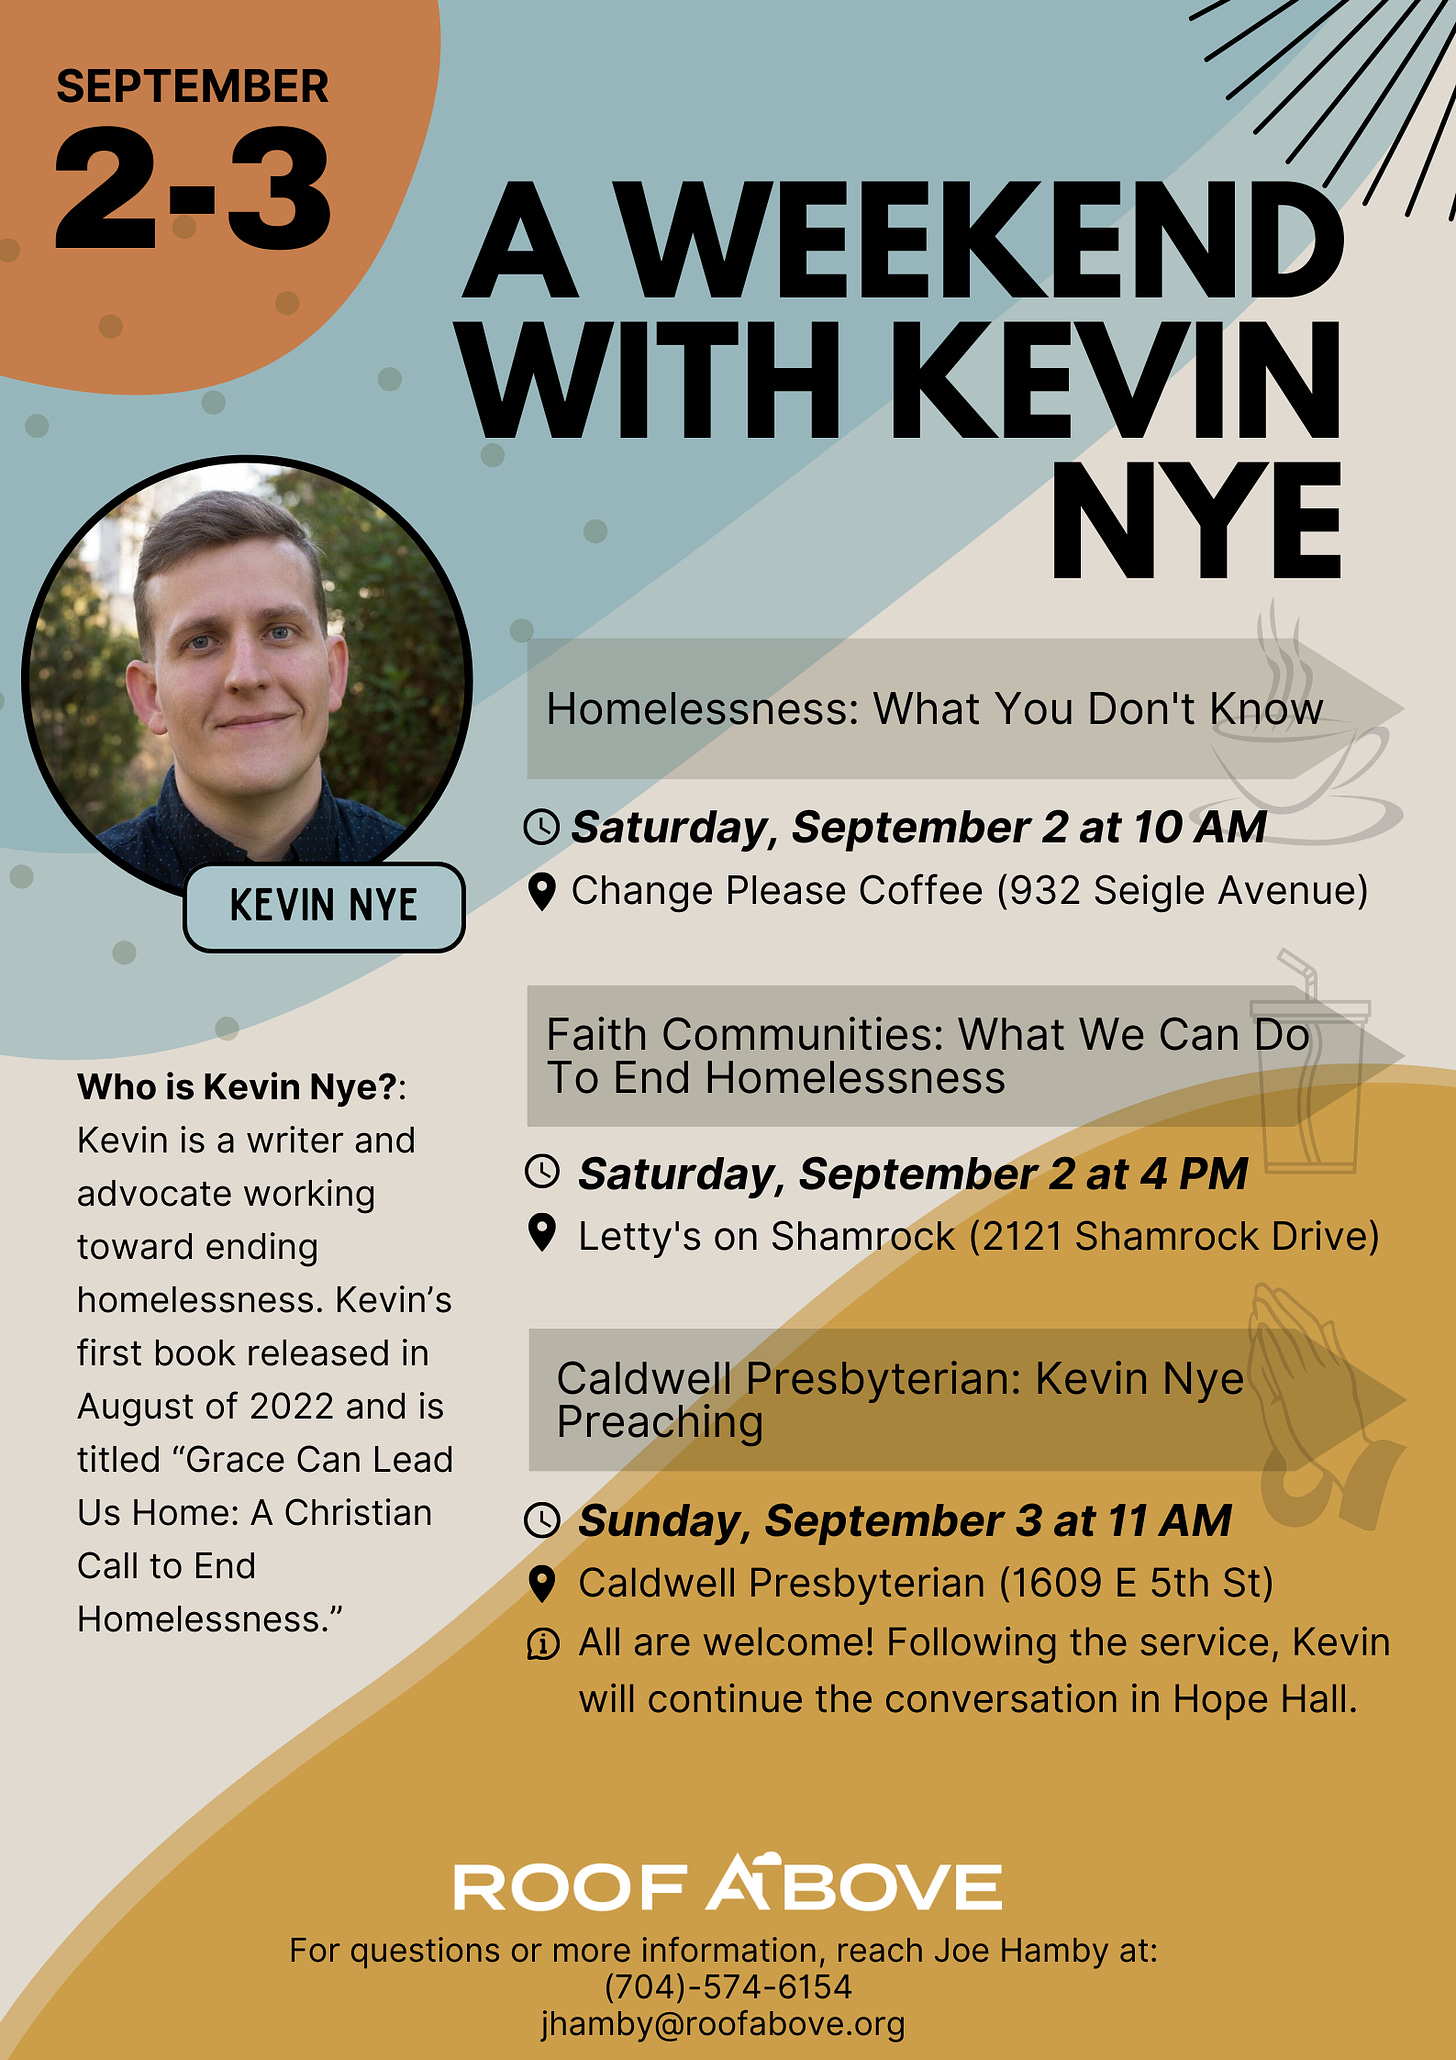 Kevin's itinerary for Charlotte includes the following: Saturday, Sept 2 at 10am at Change Please Coffee, 932 Seigle Ave), and 4pm at Letty's on Shamrock, 2121 Shamrock Dr. On Sunday Kevin in preaching at Caldwell Presbyterian, 1609 E 5th St, at 11am.